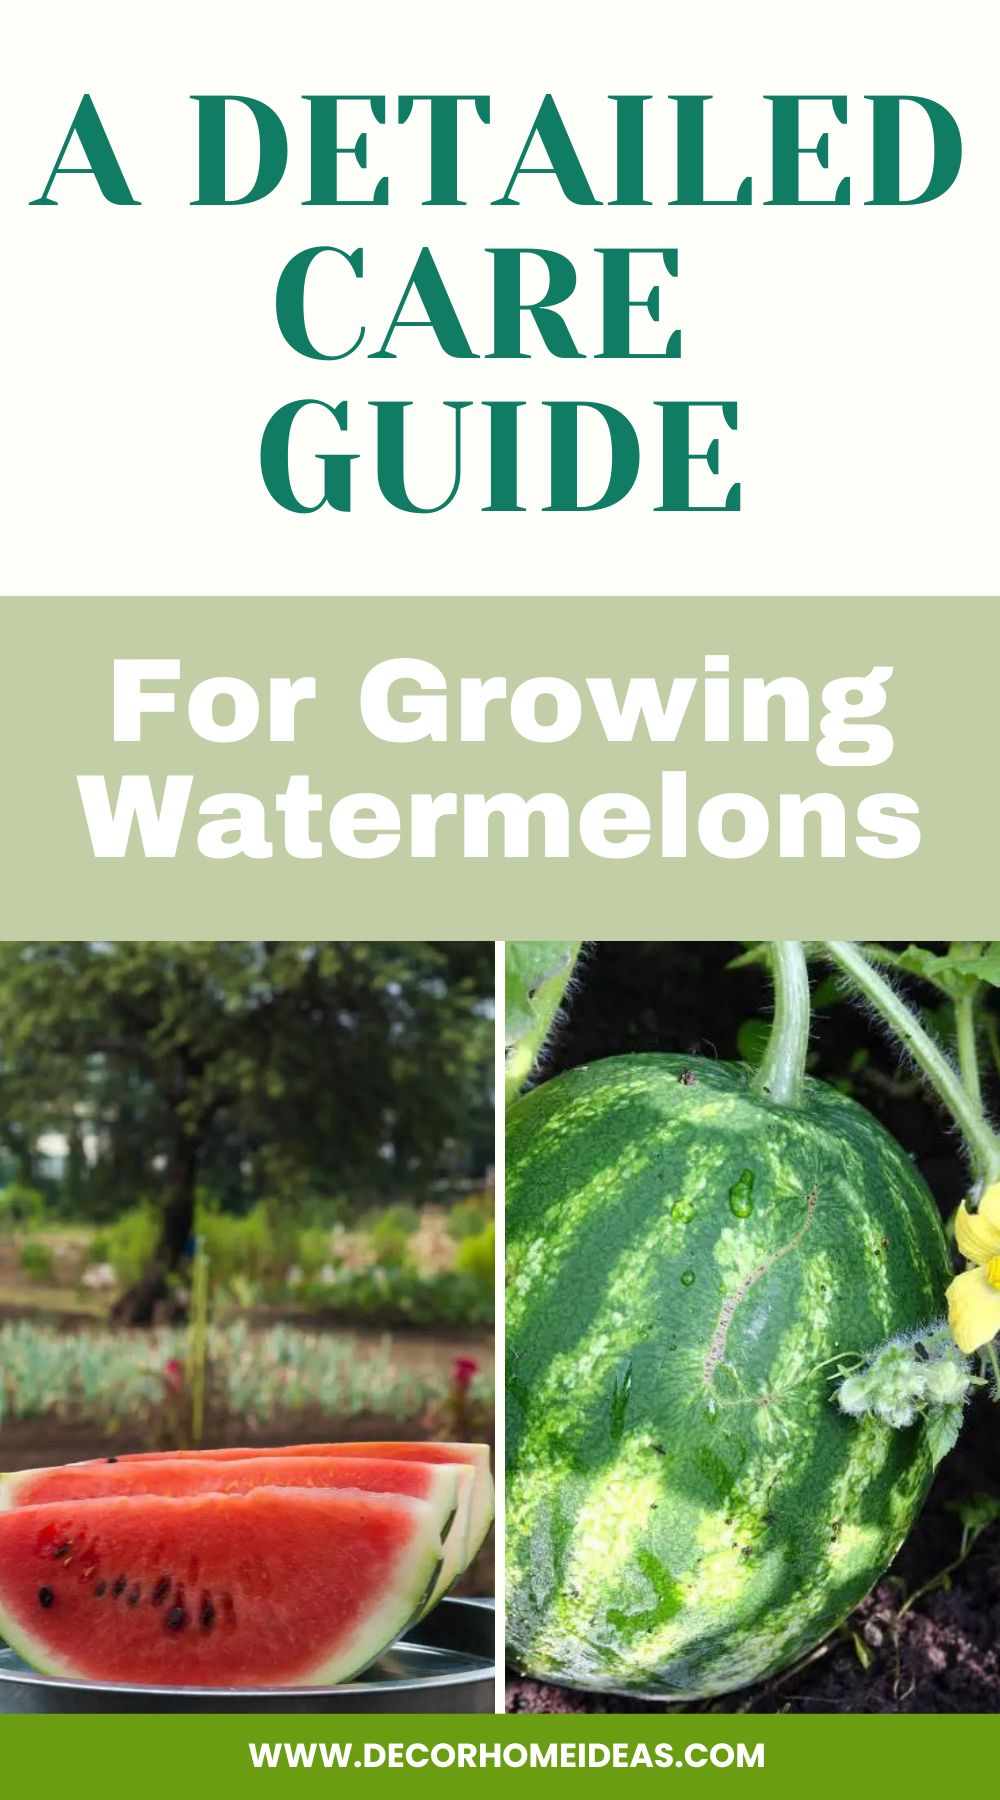 Master the art of growing watermelons with this detailed care guide. From choosing the right varieties to providing optimal growing conditions, this guide covers all the essential steps and tips to help you grow juicy and delicious watermelons in your own garden.